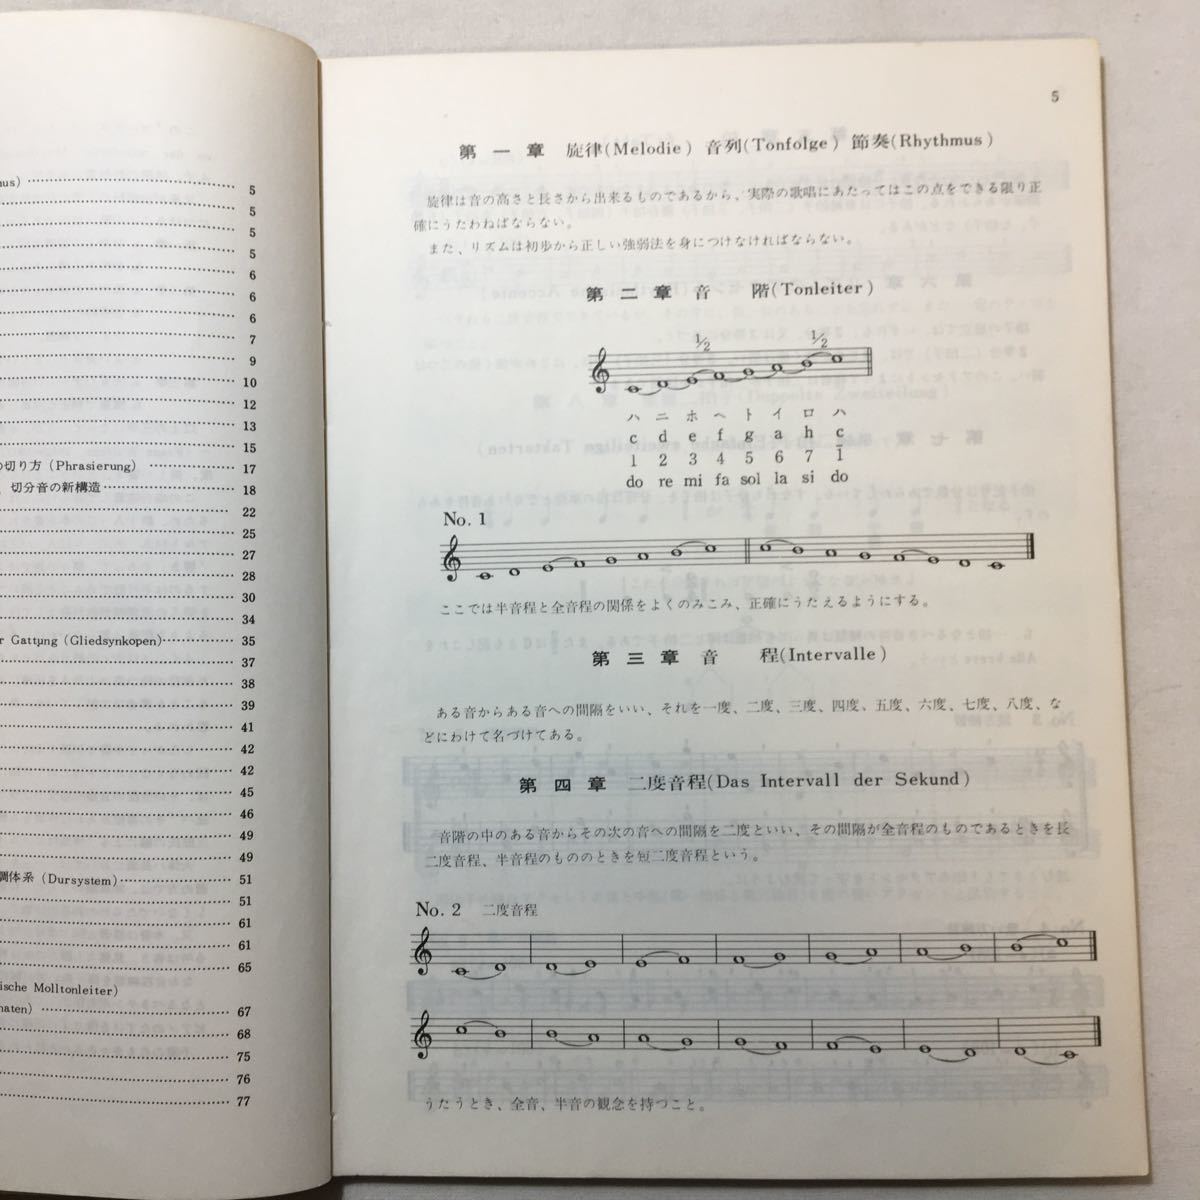 zaa-285! choir exercises volume Ⅰ castle many moreover, .. explanation . number B5*80. Kawai publish issue year month 1975 year 4 month 